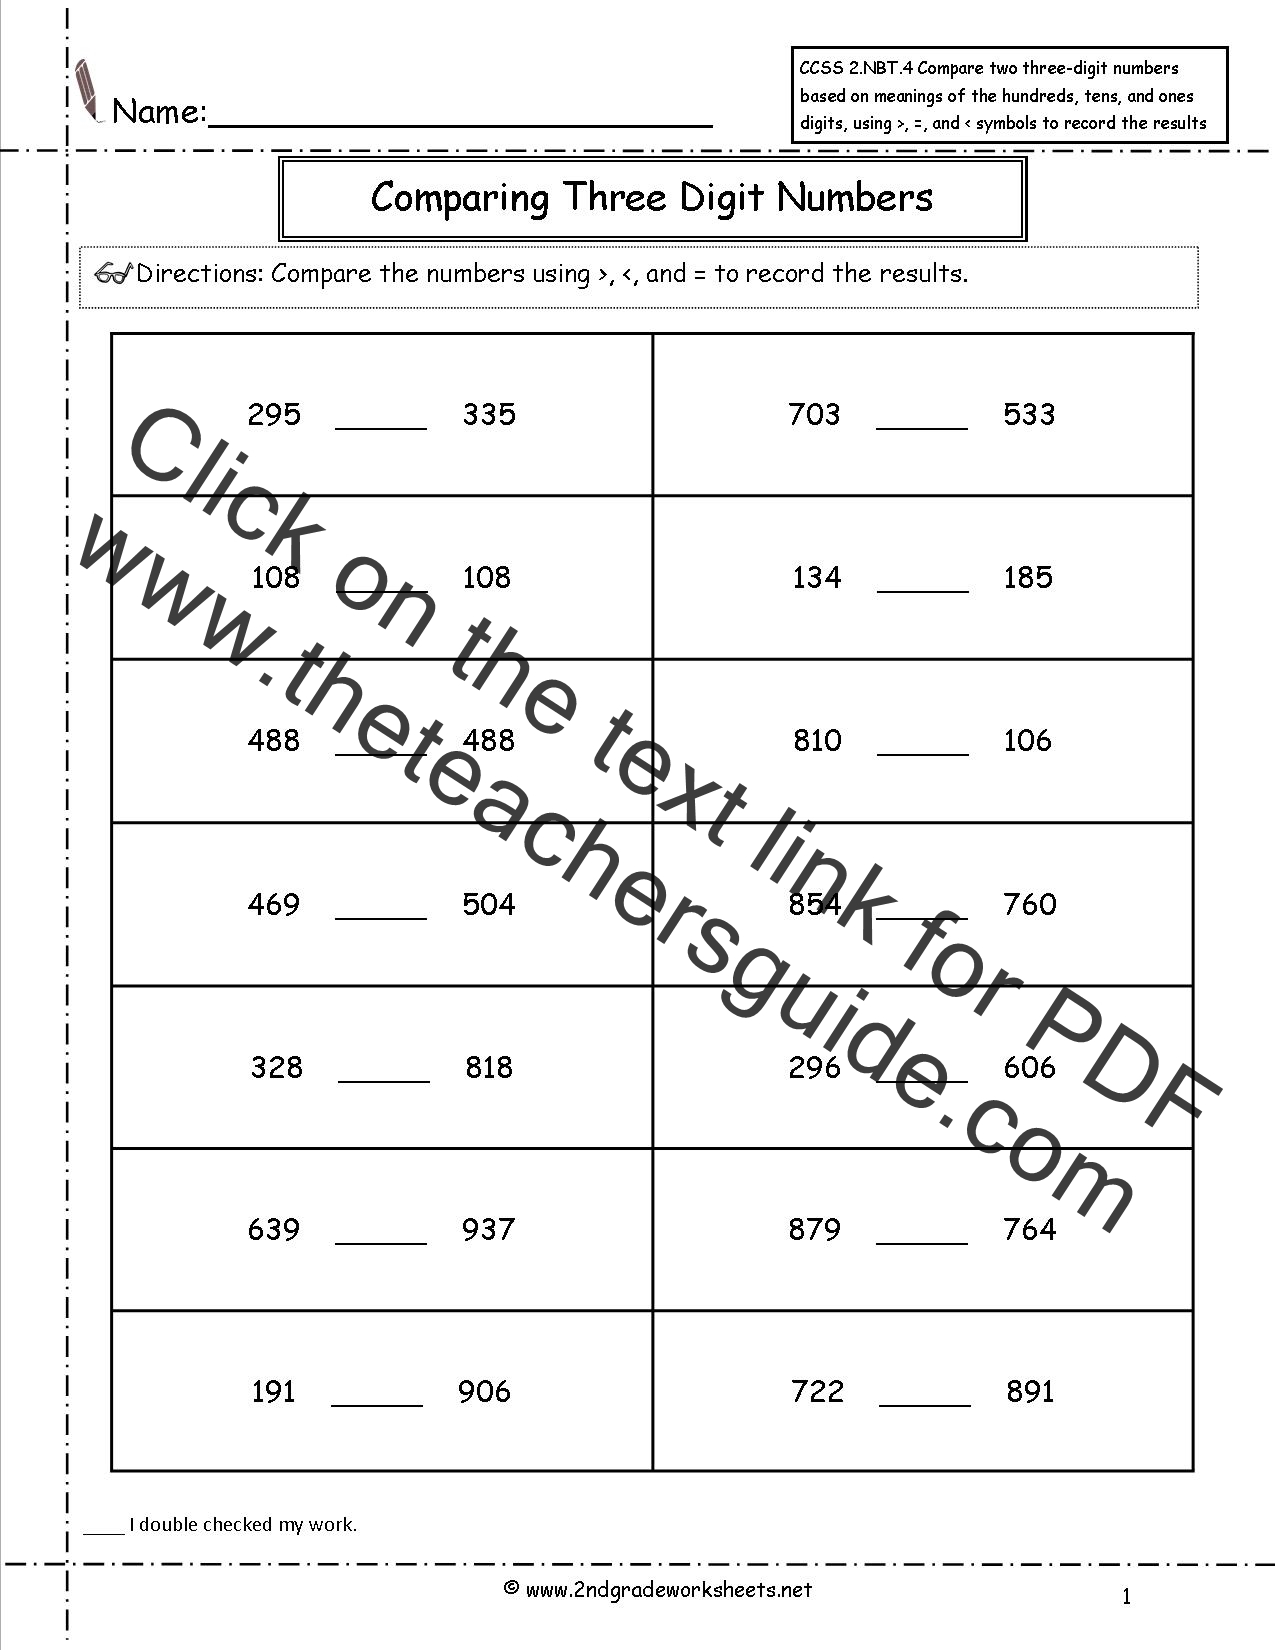 CCSS 2 NBT 4 Worksheets Comparing Three Digit Numbers 